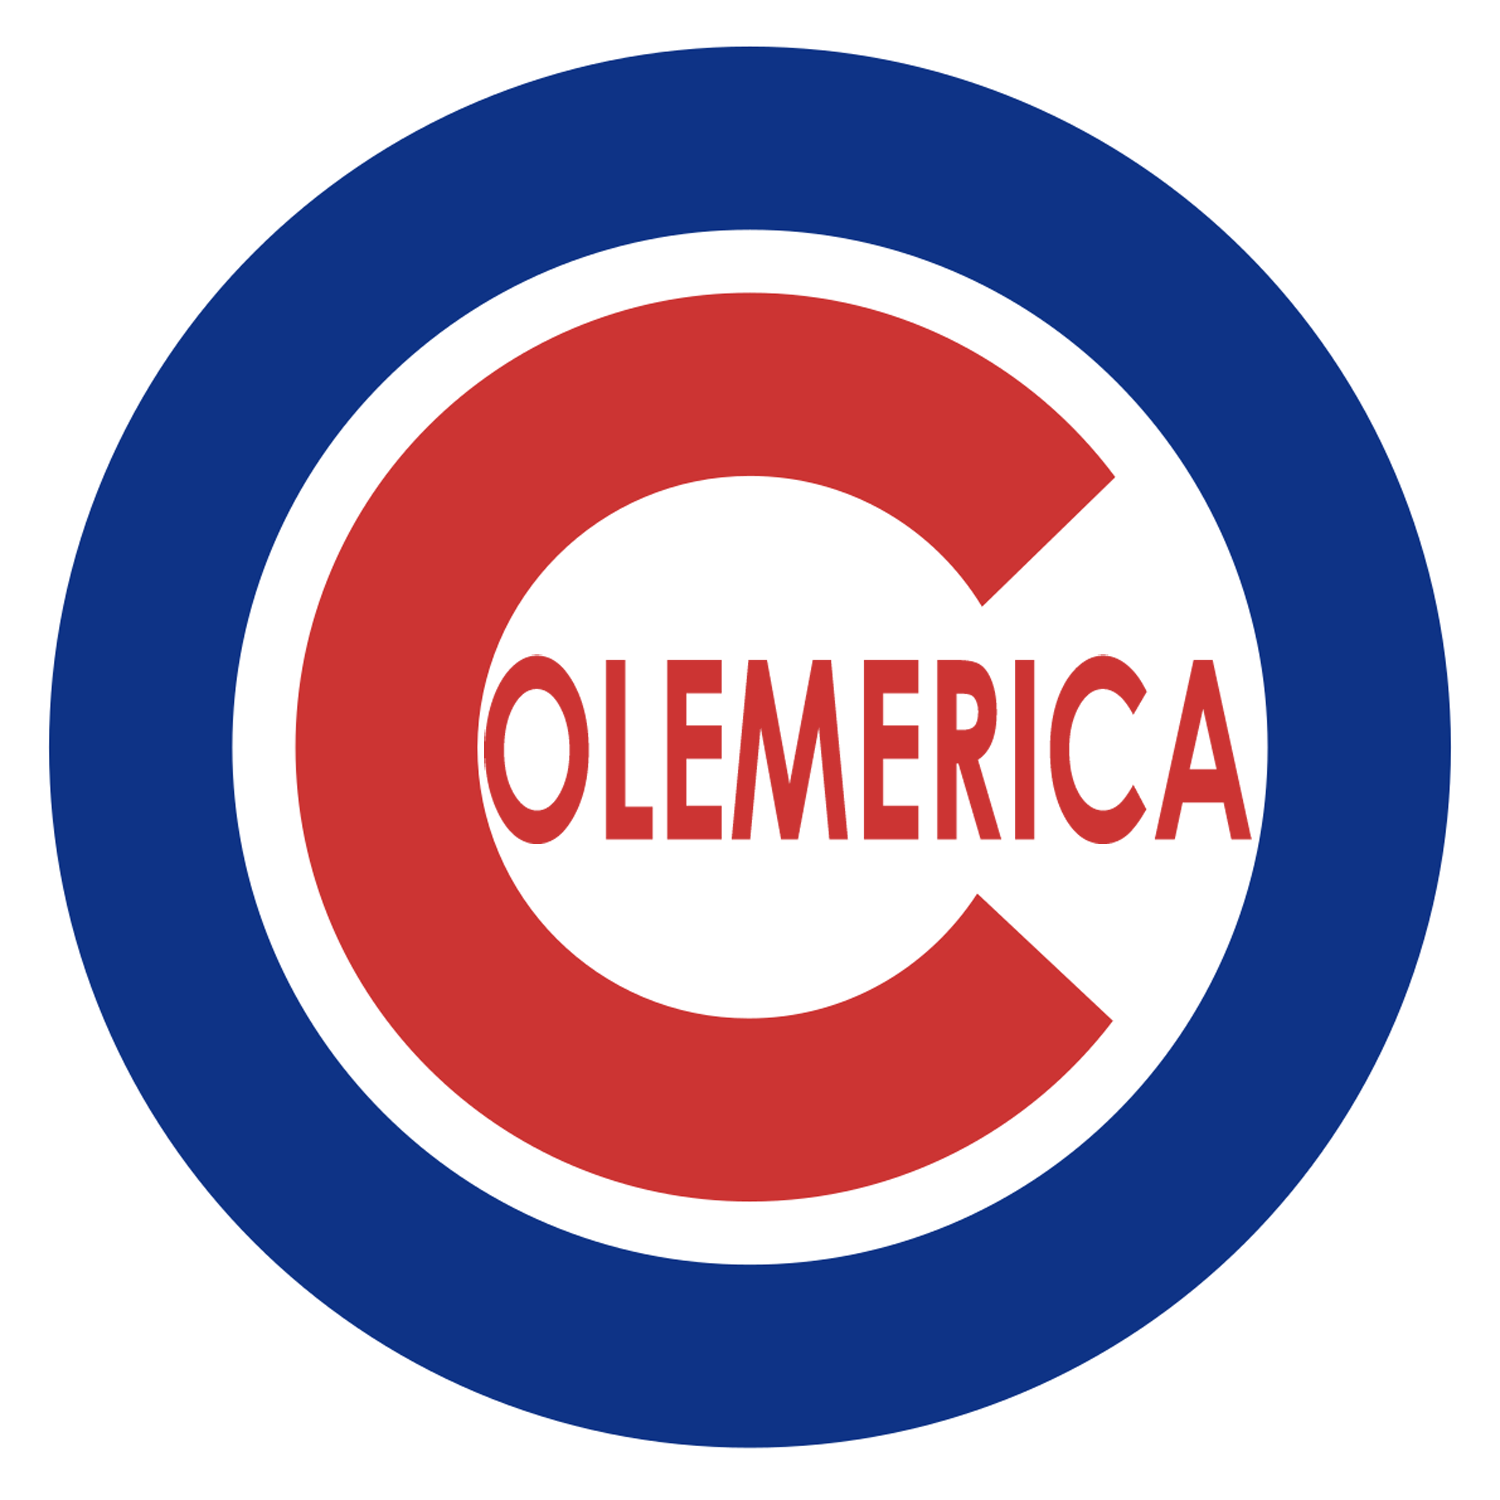 The Colemerica Podcast